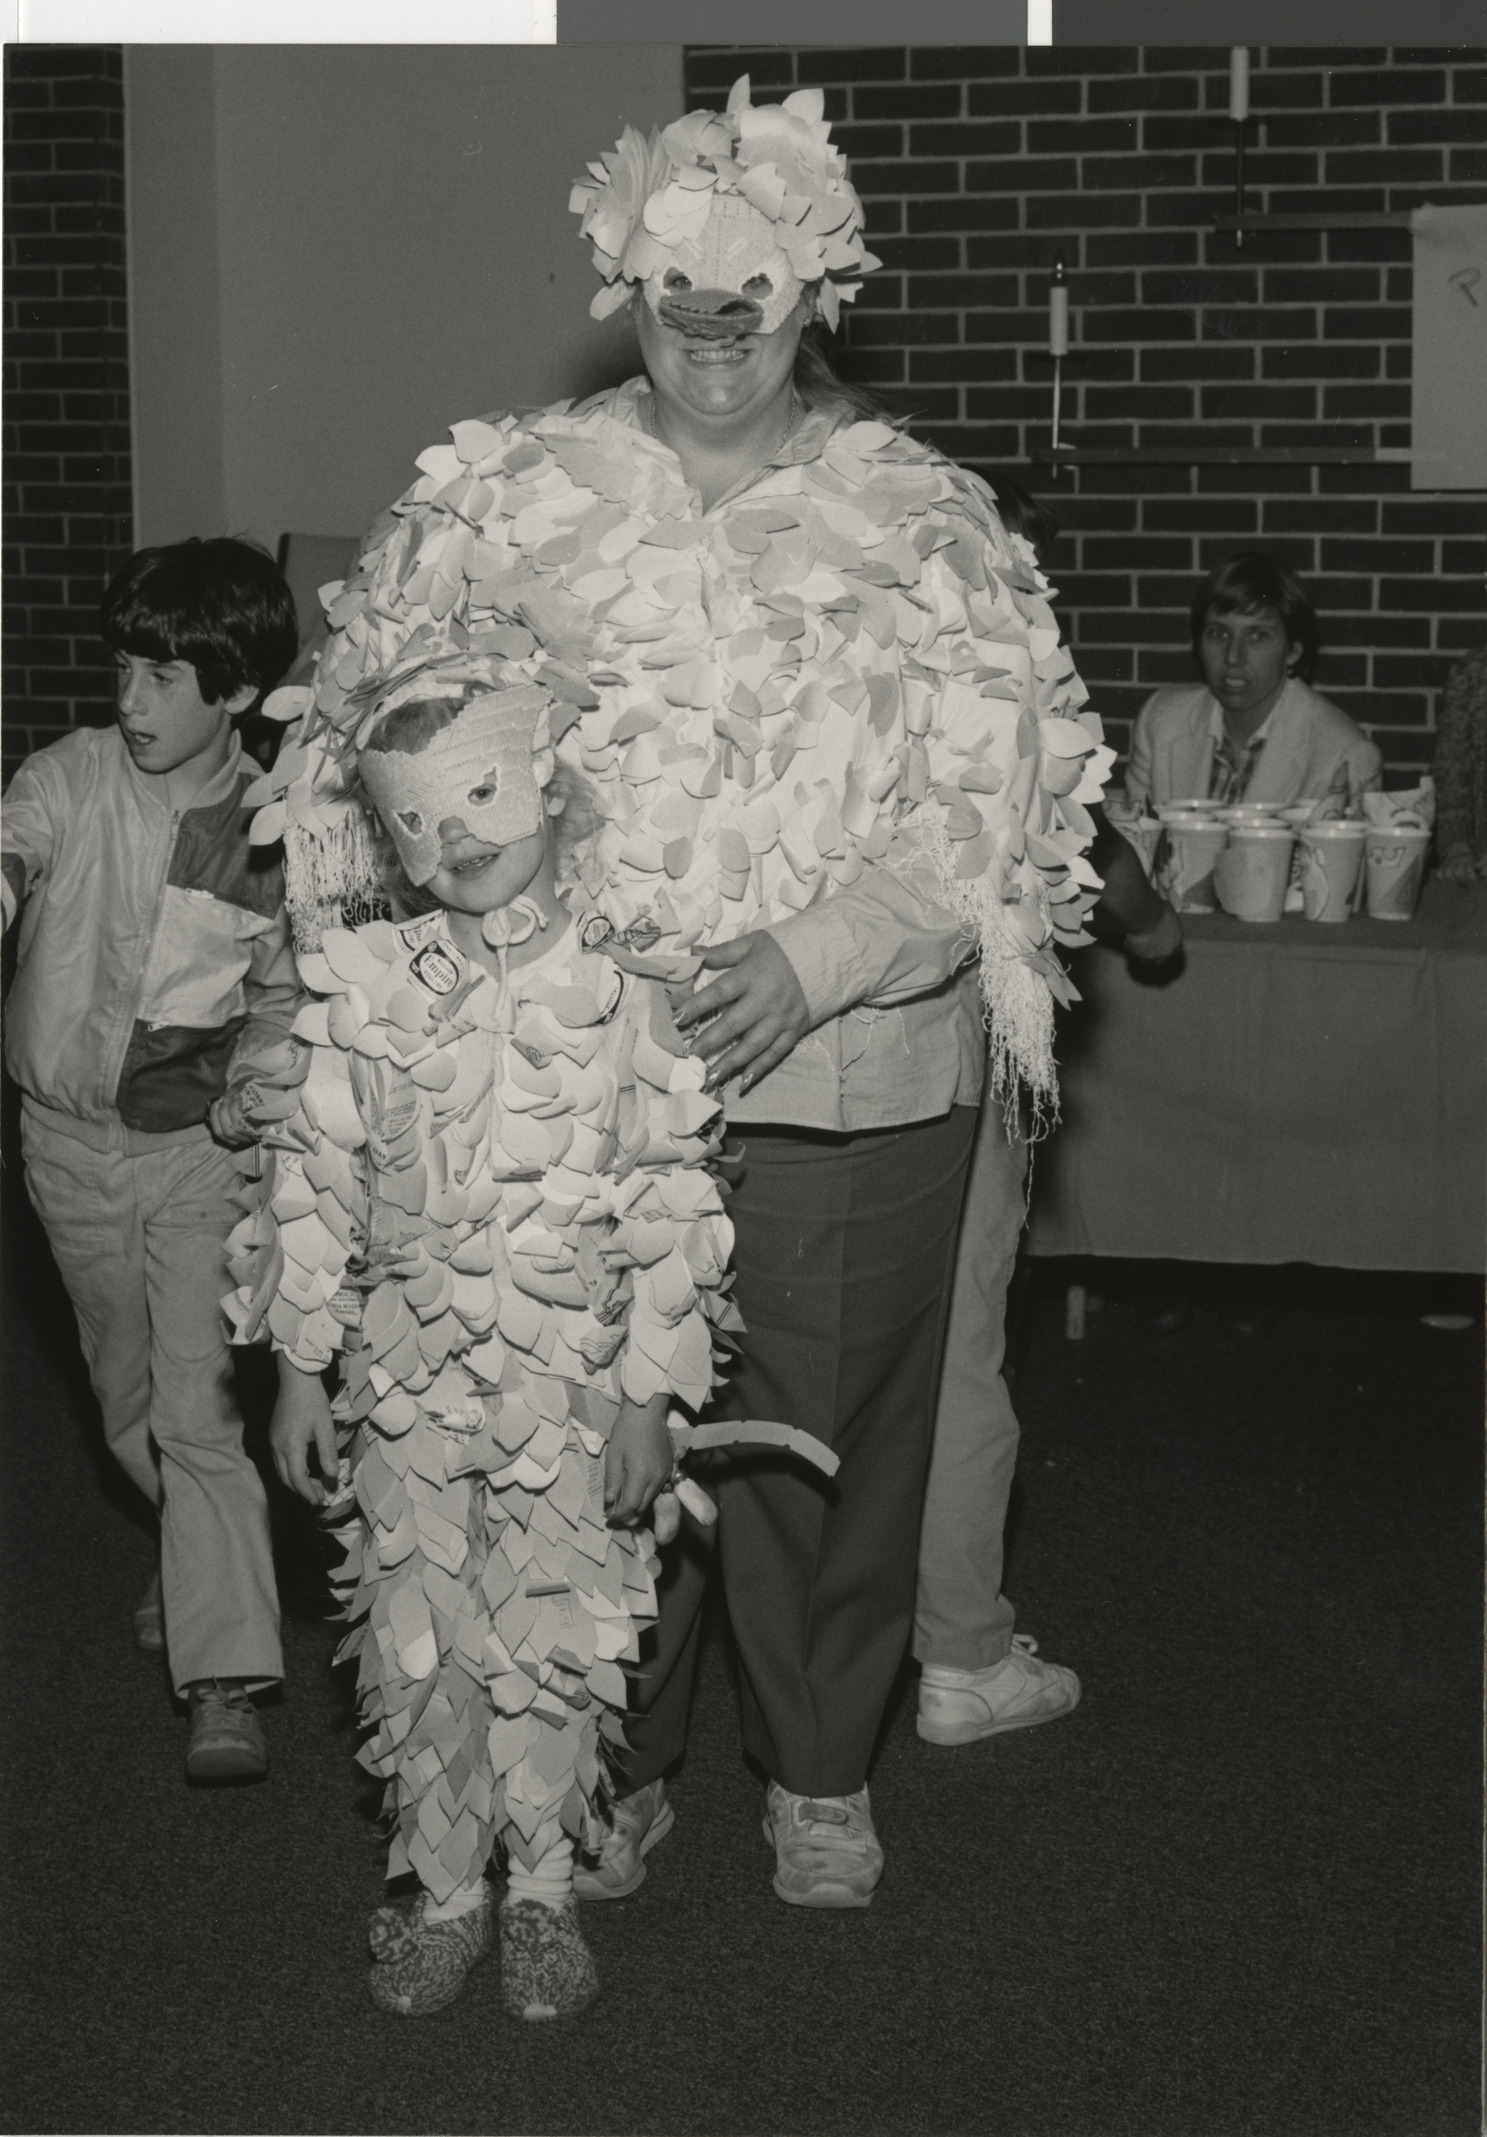 Photograph of Andee Boiman and Jackie Boiman dressed as birds, 1980s